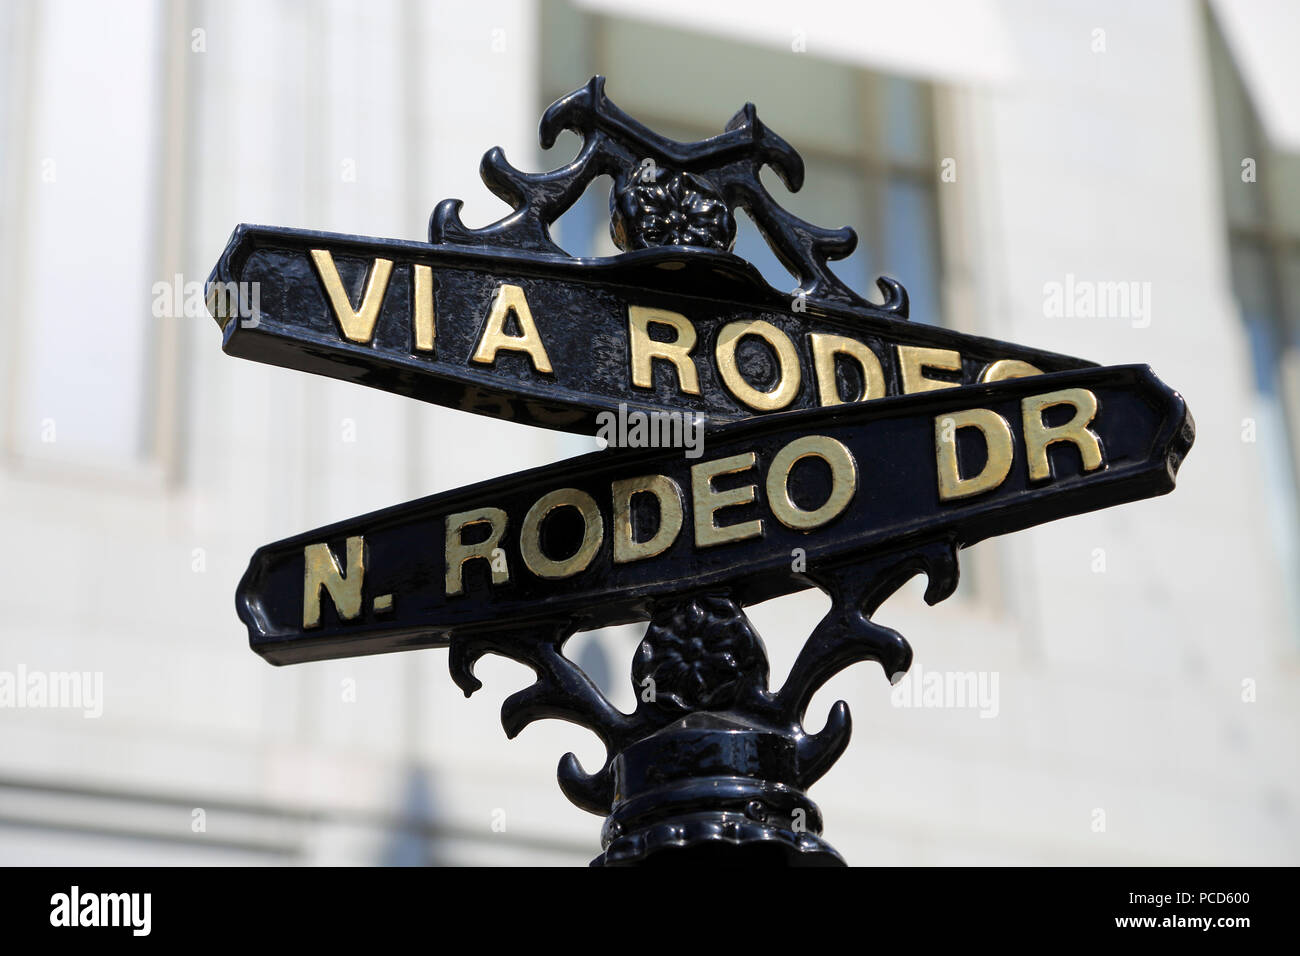 Rodeo Drive, Beverly Hills, Los Angeles, California, United States of America, North America Stock Photo